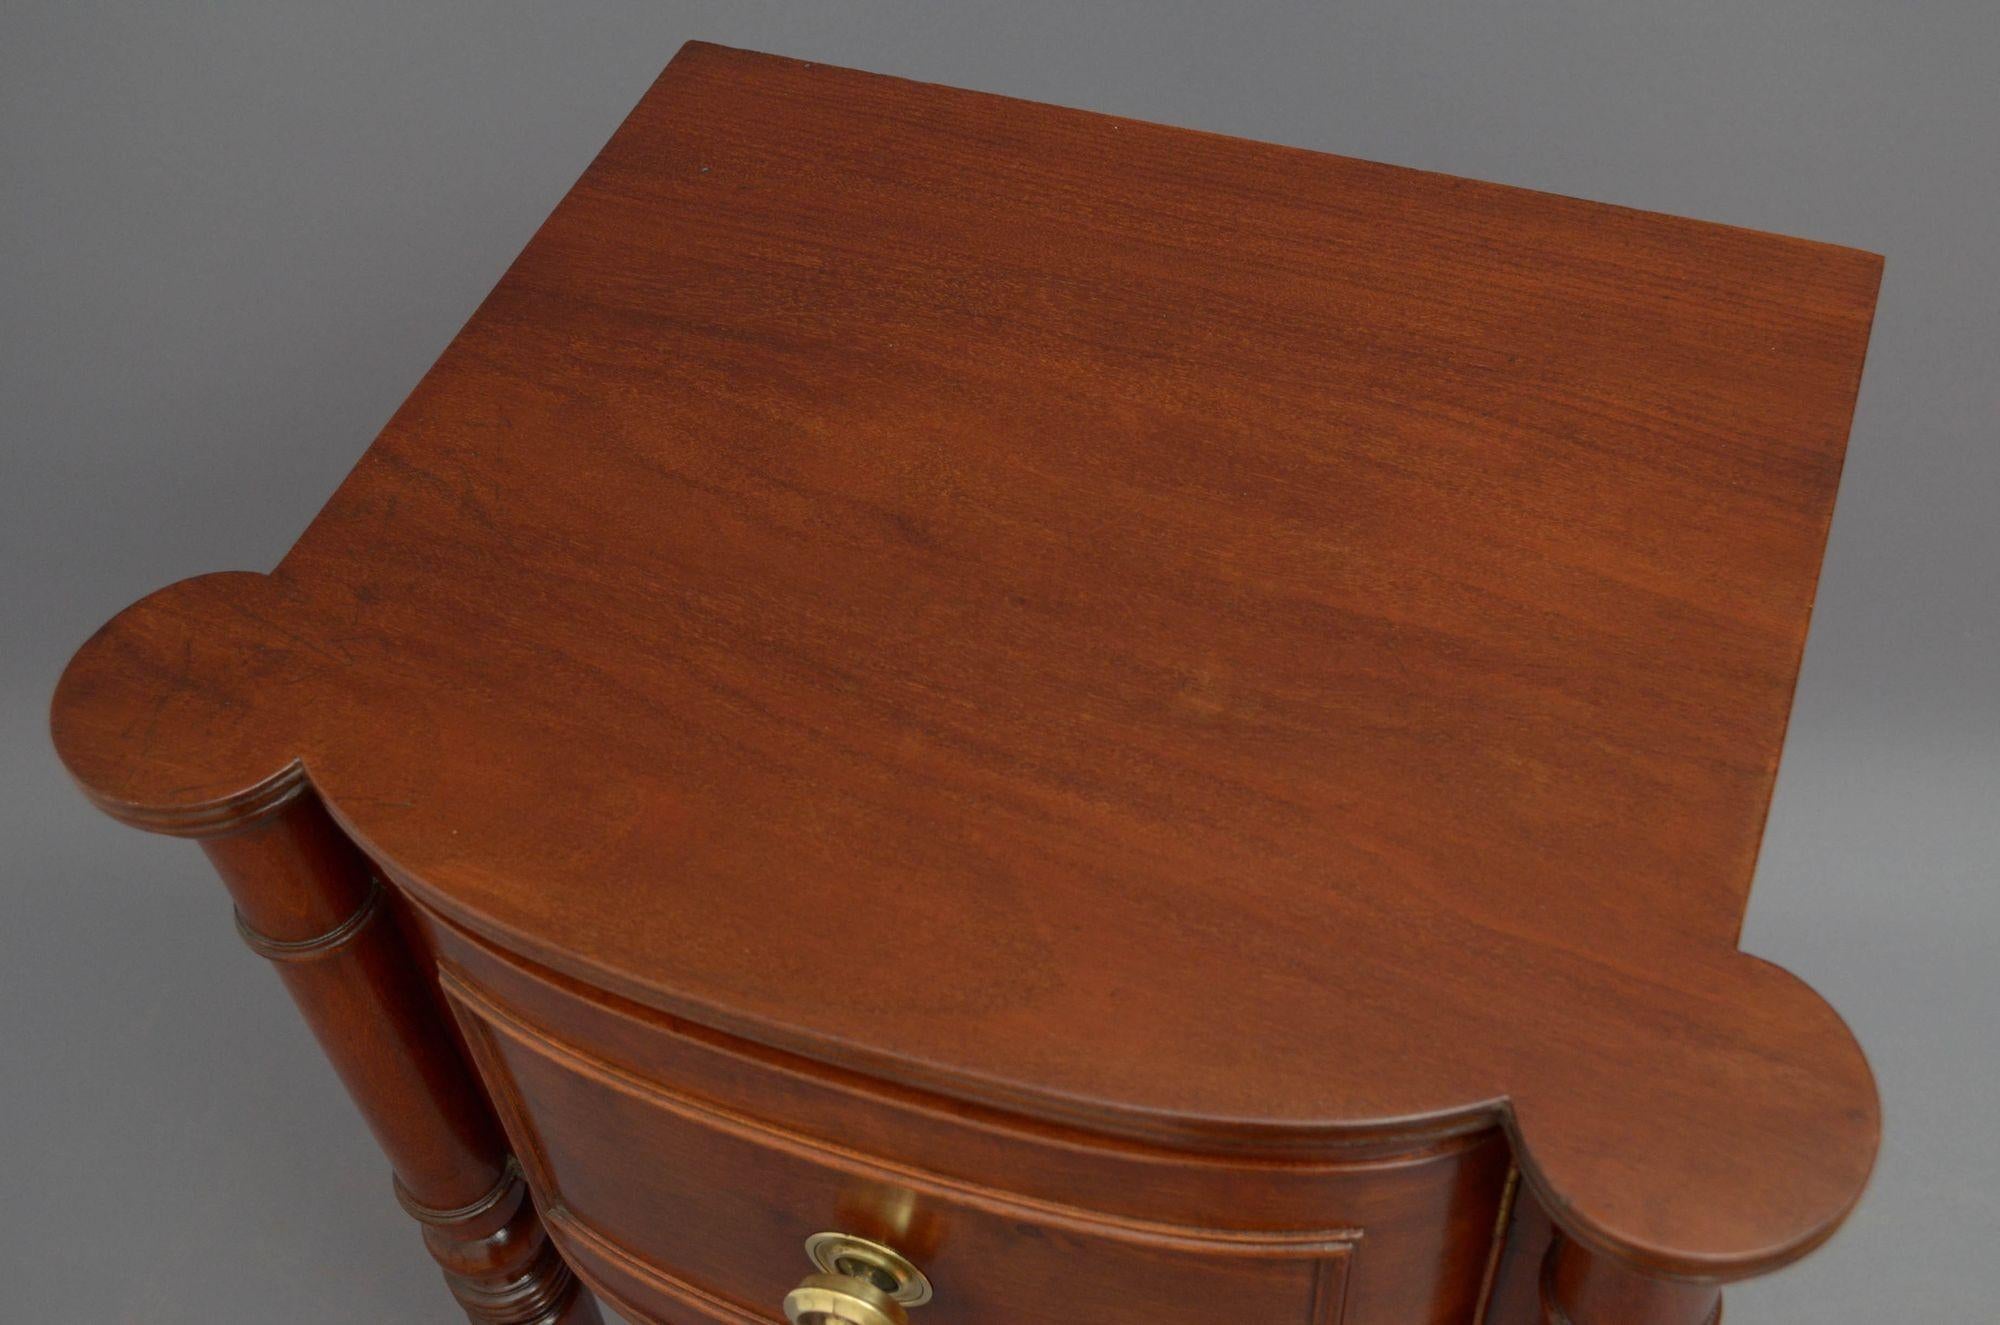 Regency Mahogany Bedside Cabinet In Good Condition For Sale In Whaley Bridge, GB